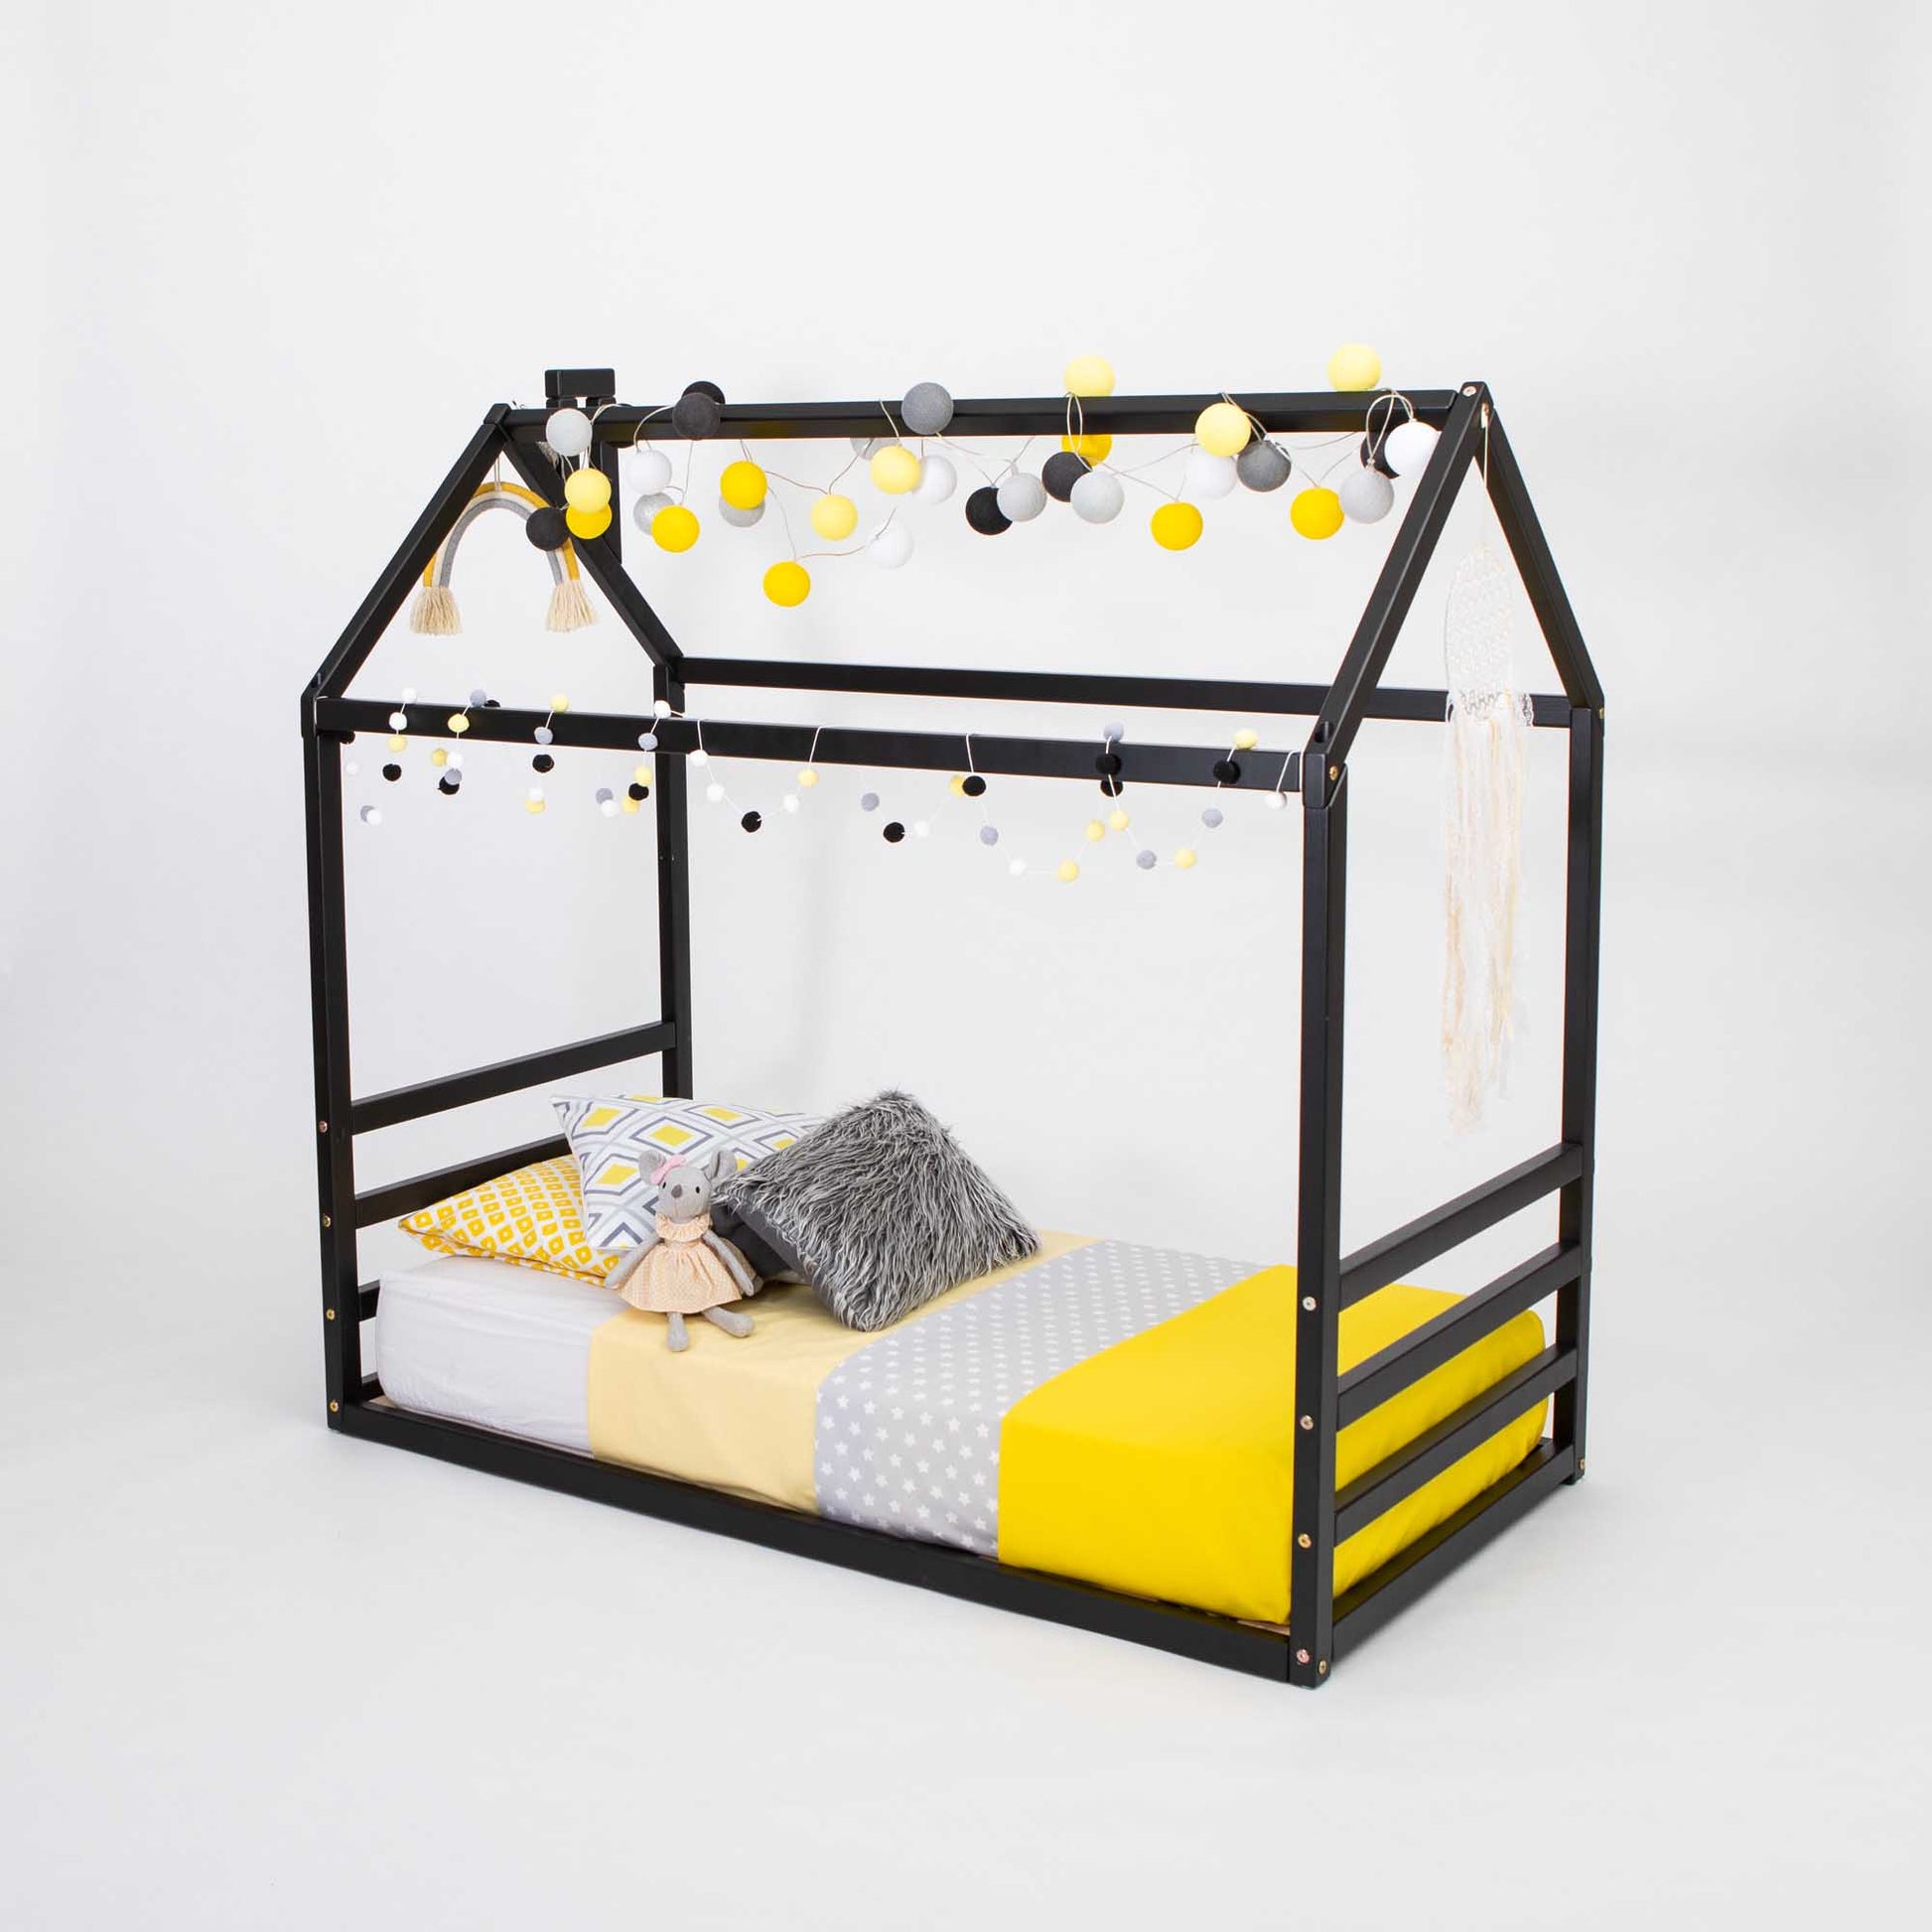 A Floor house-frame bed with a horizontal headboard and footboard adorned with yellow pom poms.